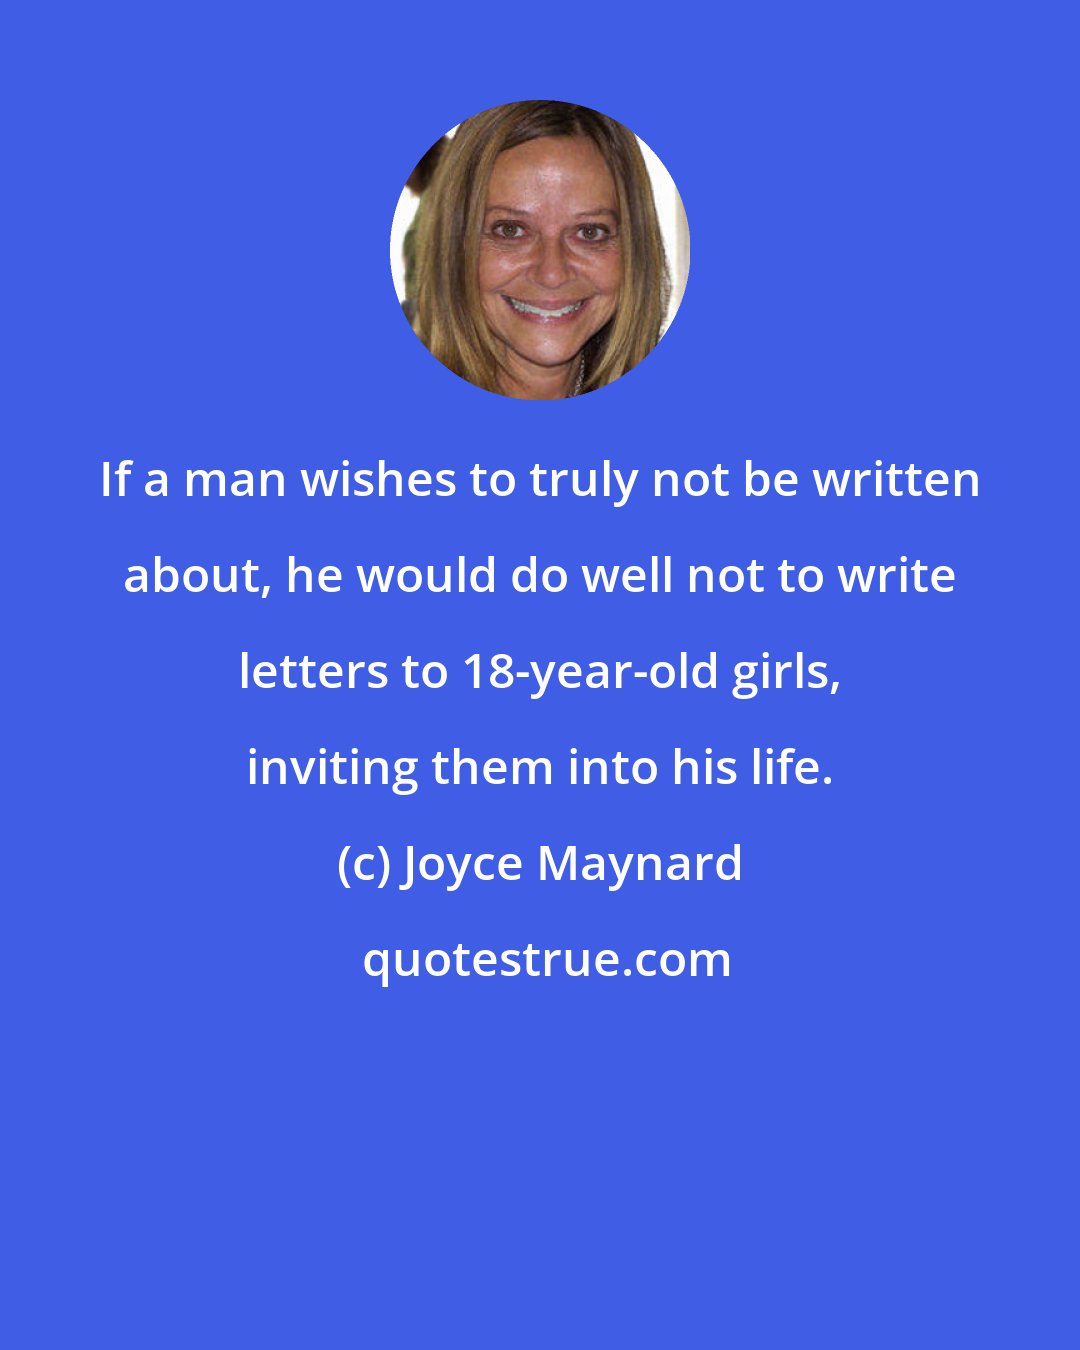 Joyce Maynard: If a man wishes to truly not be written about, he would do well not to write letters to 18-year-old girls, inviting them into his life.